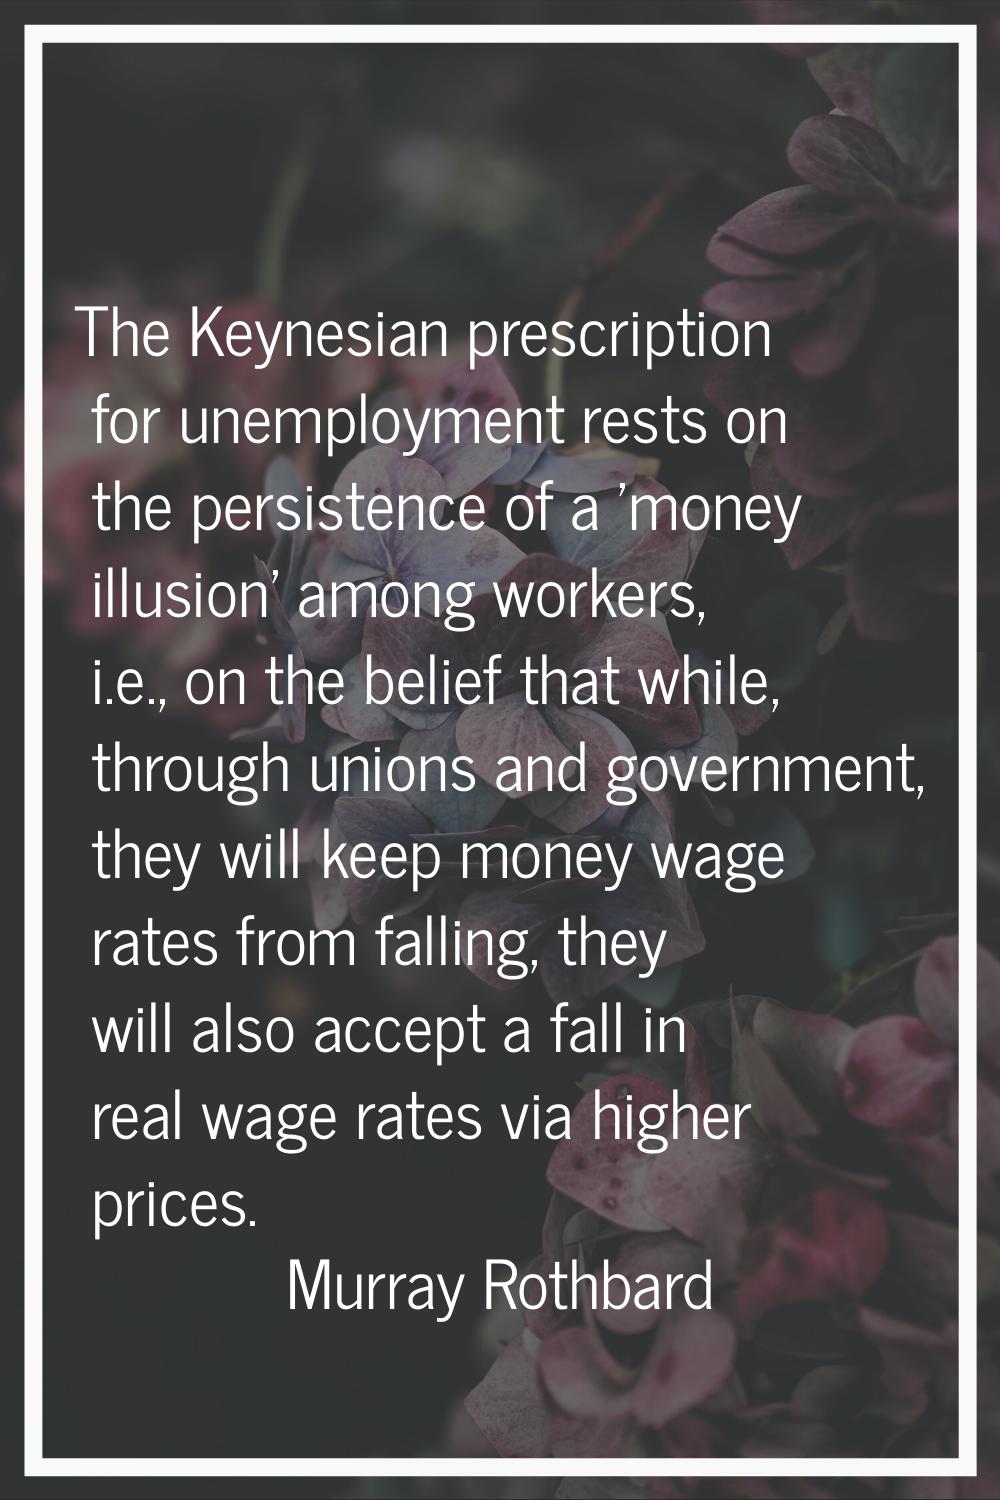 The Keynesian prescription for unemployment rests on the persistence of a 'money illusion' among wo